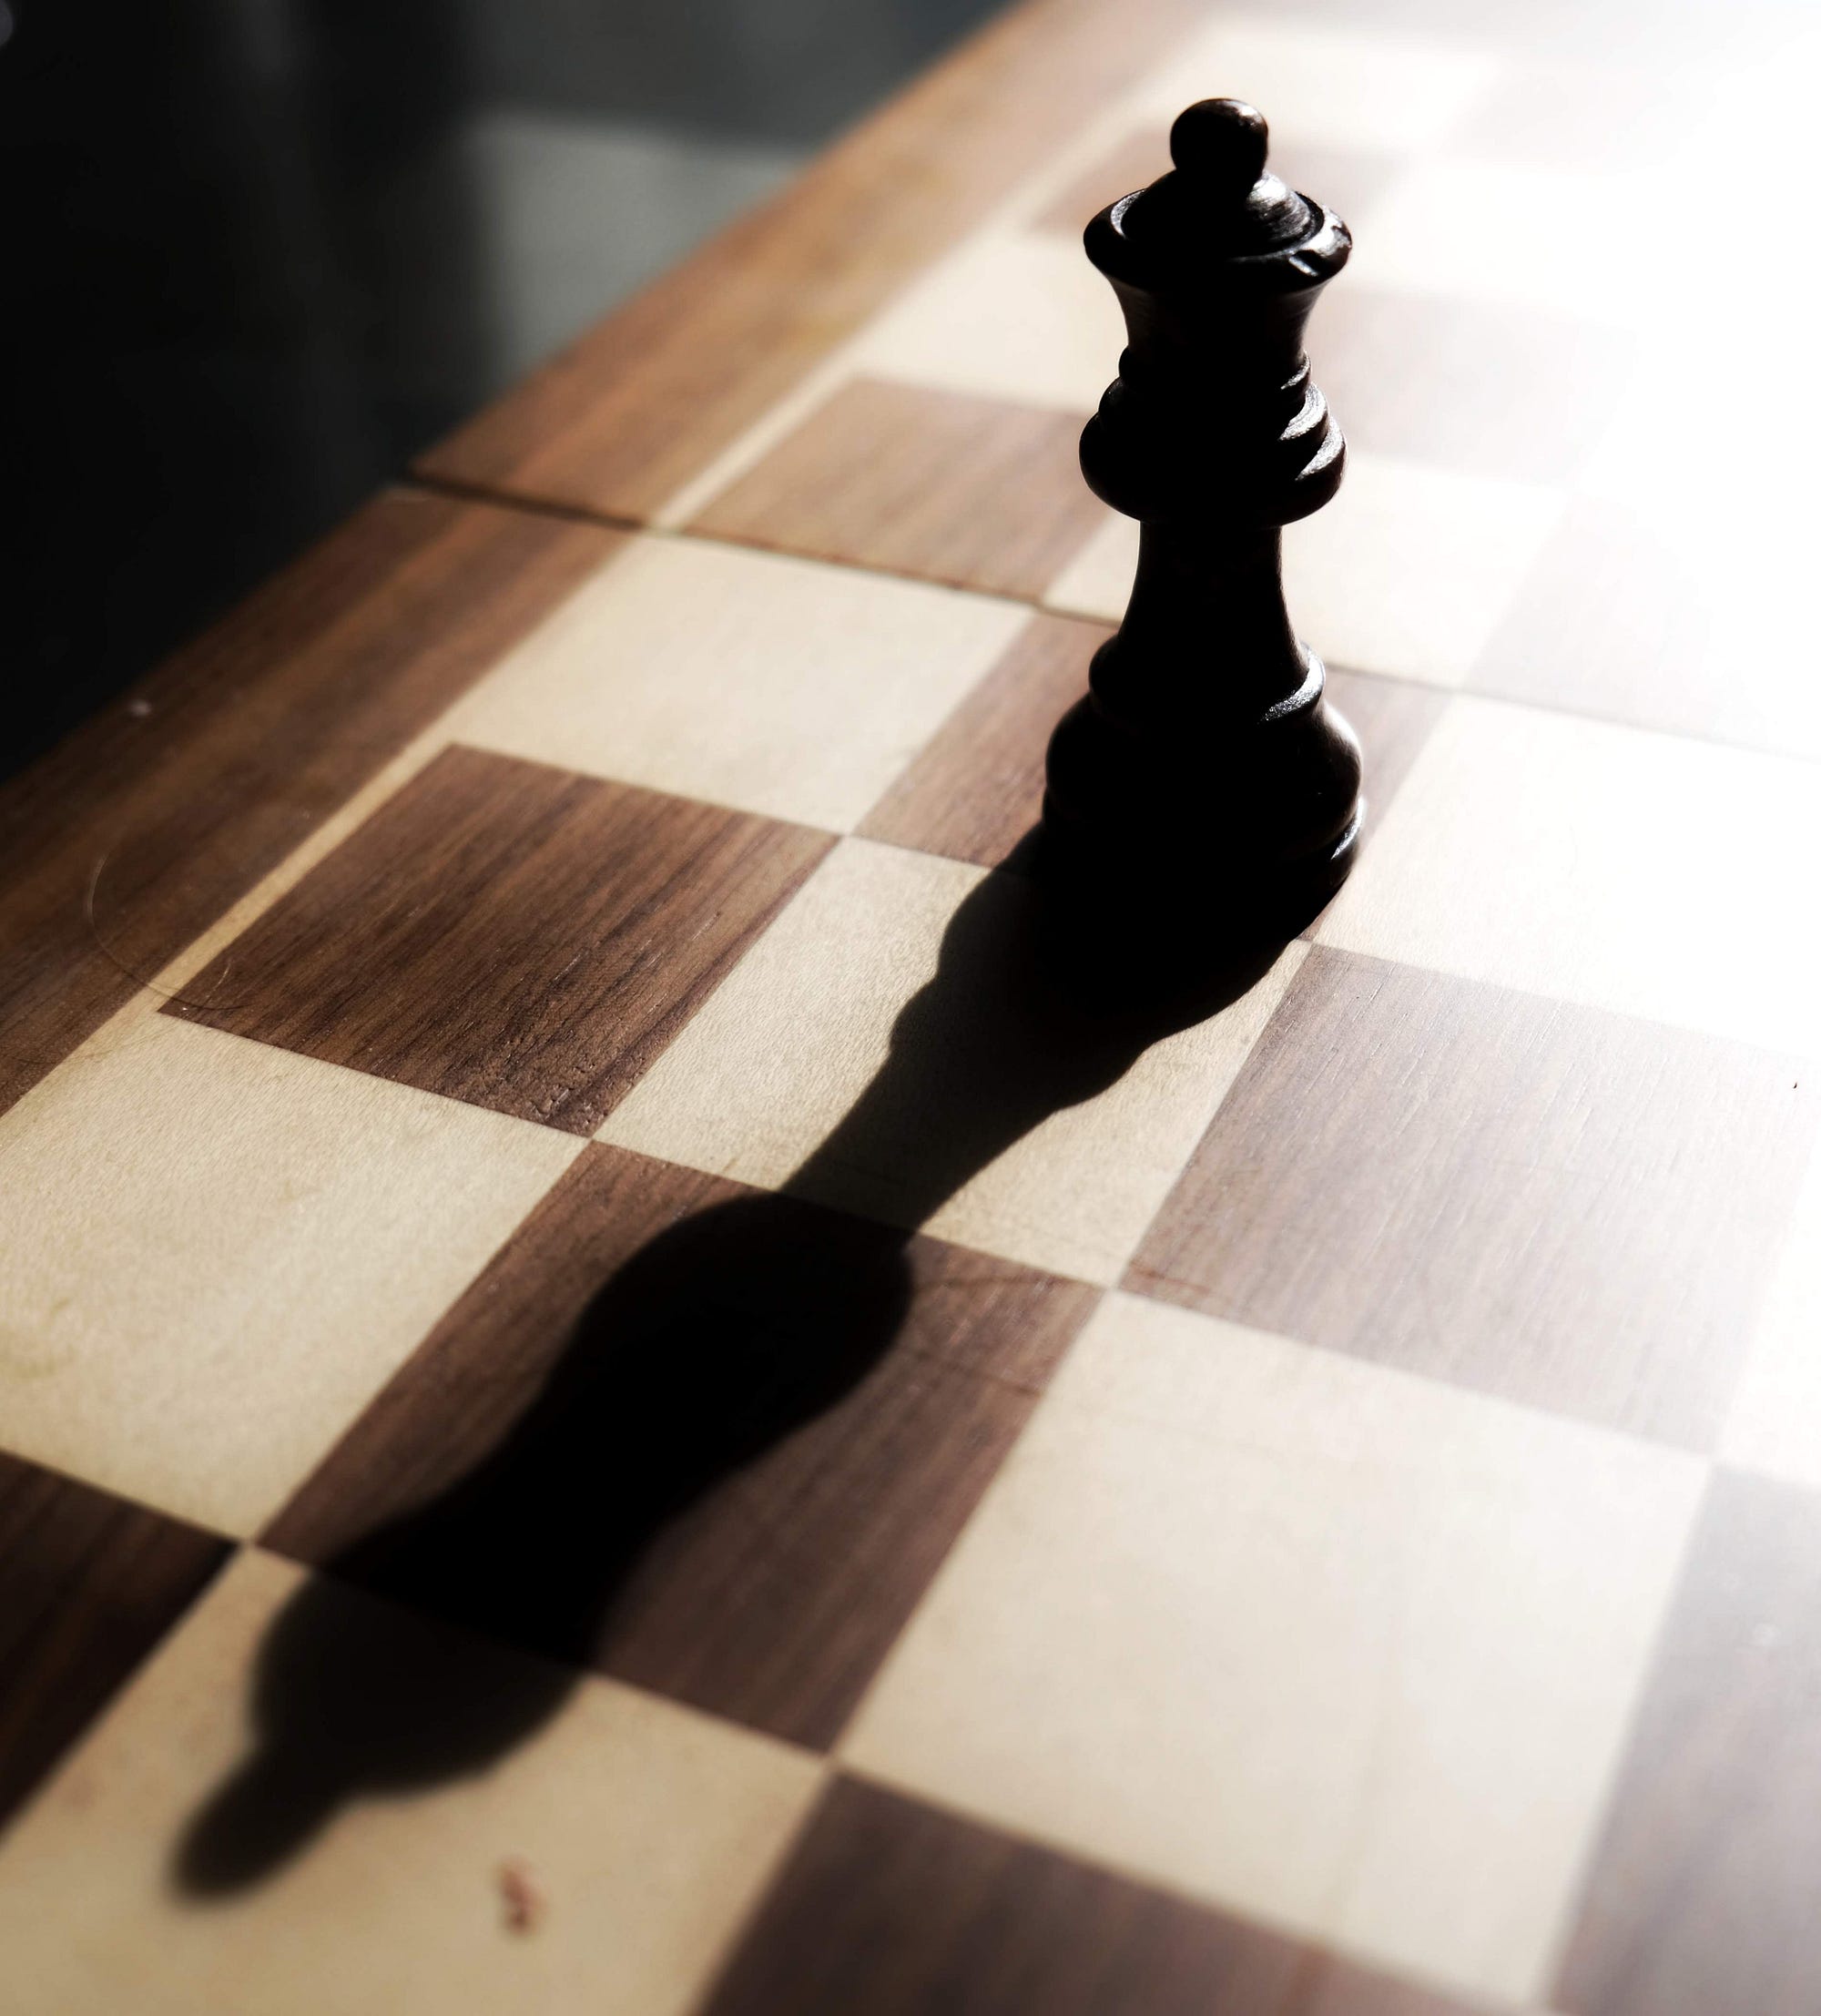 I'm a Chess Expert. Here's What 'The Queen's Gambit' Gets Right